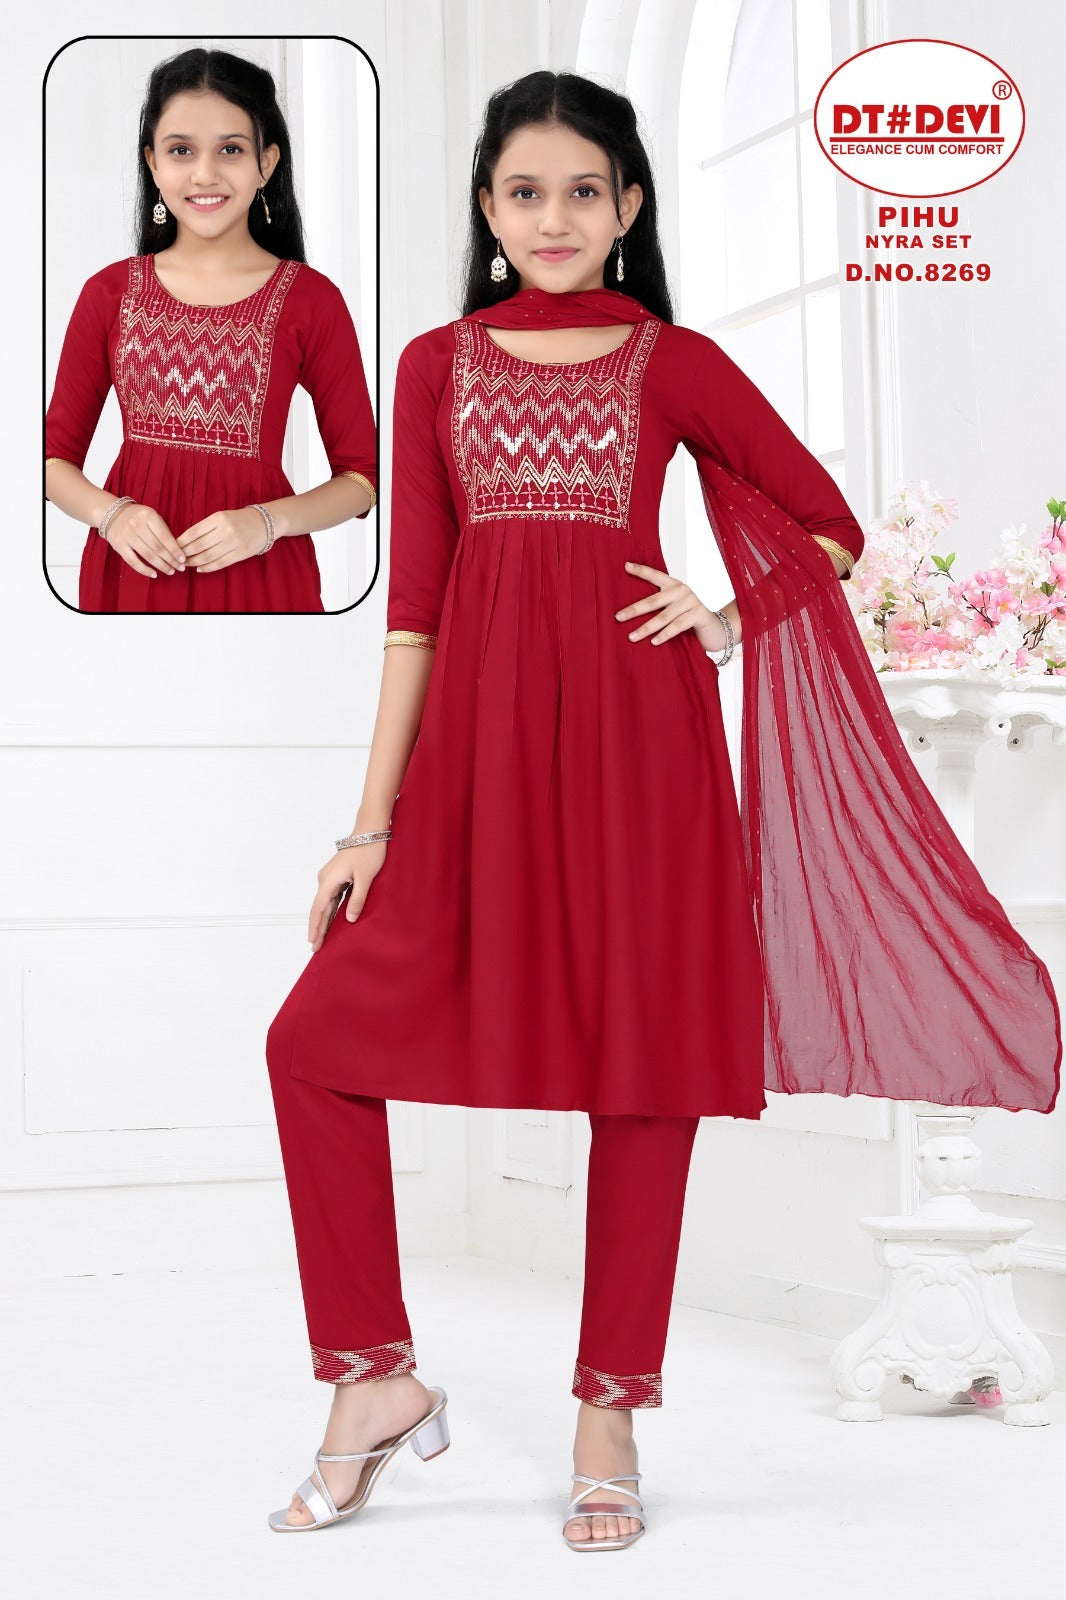 Pihu-8269 Dt Devi Rayon Girls Readymade Suits